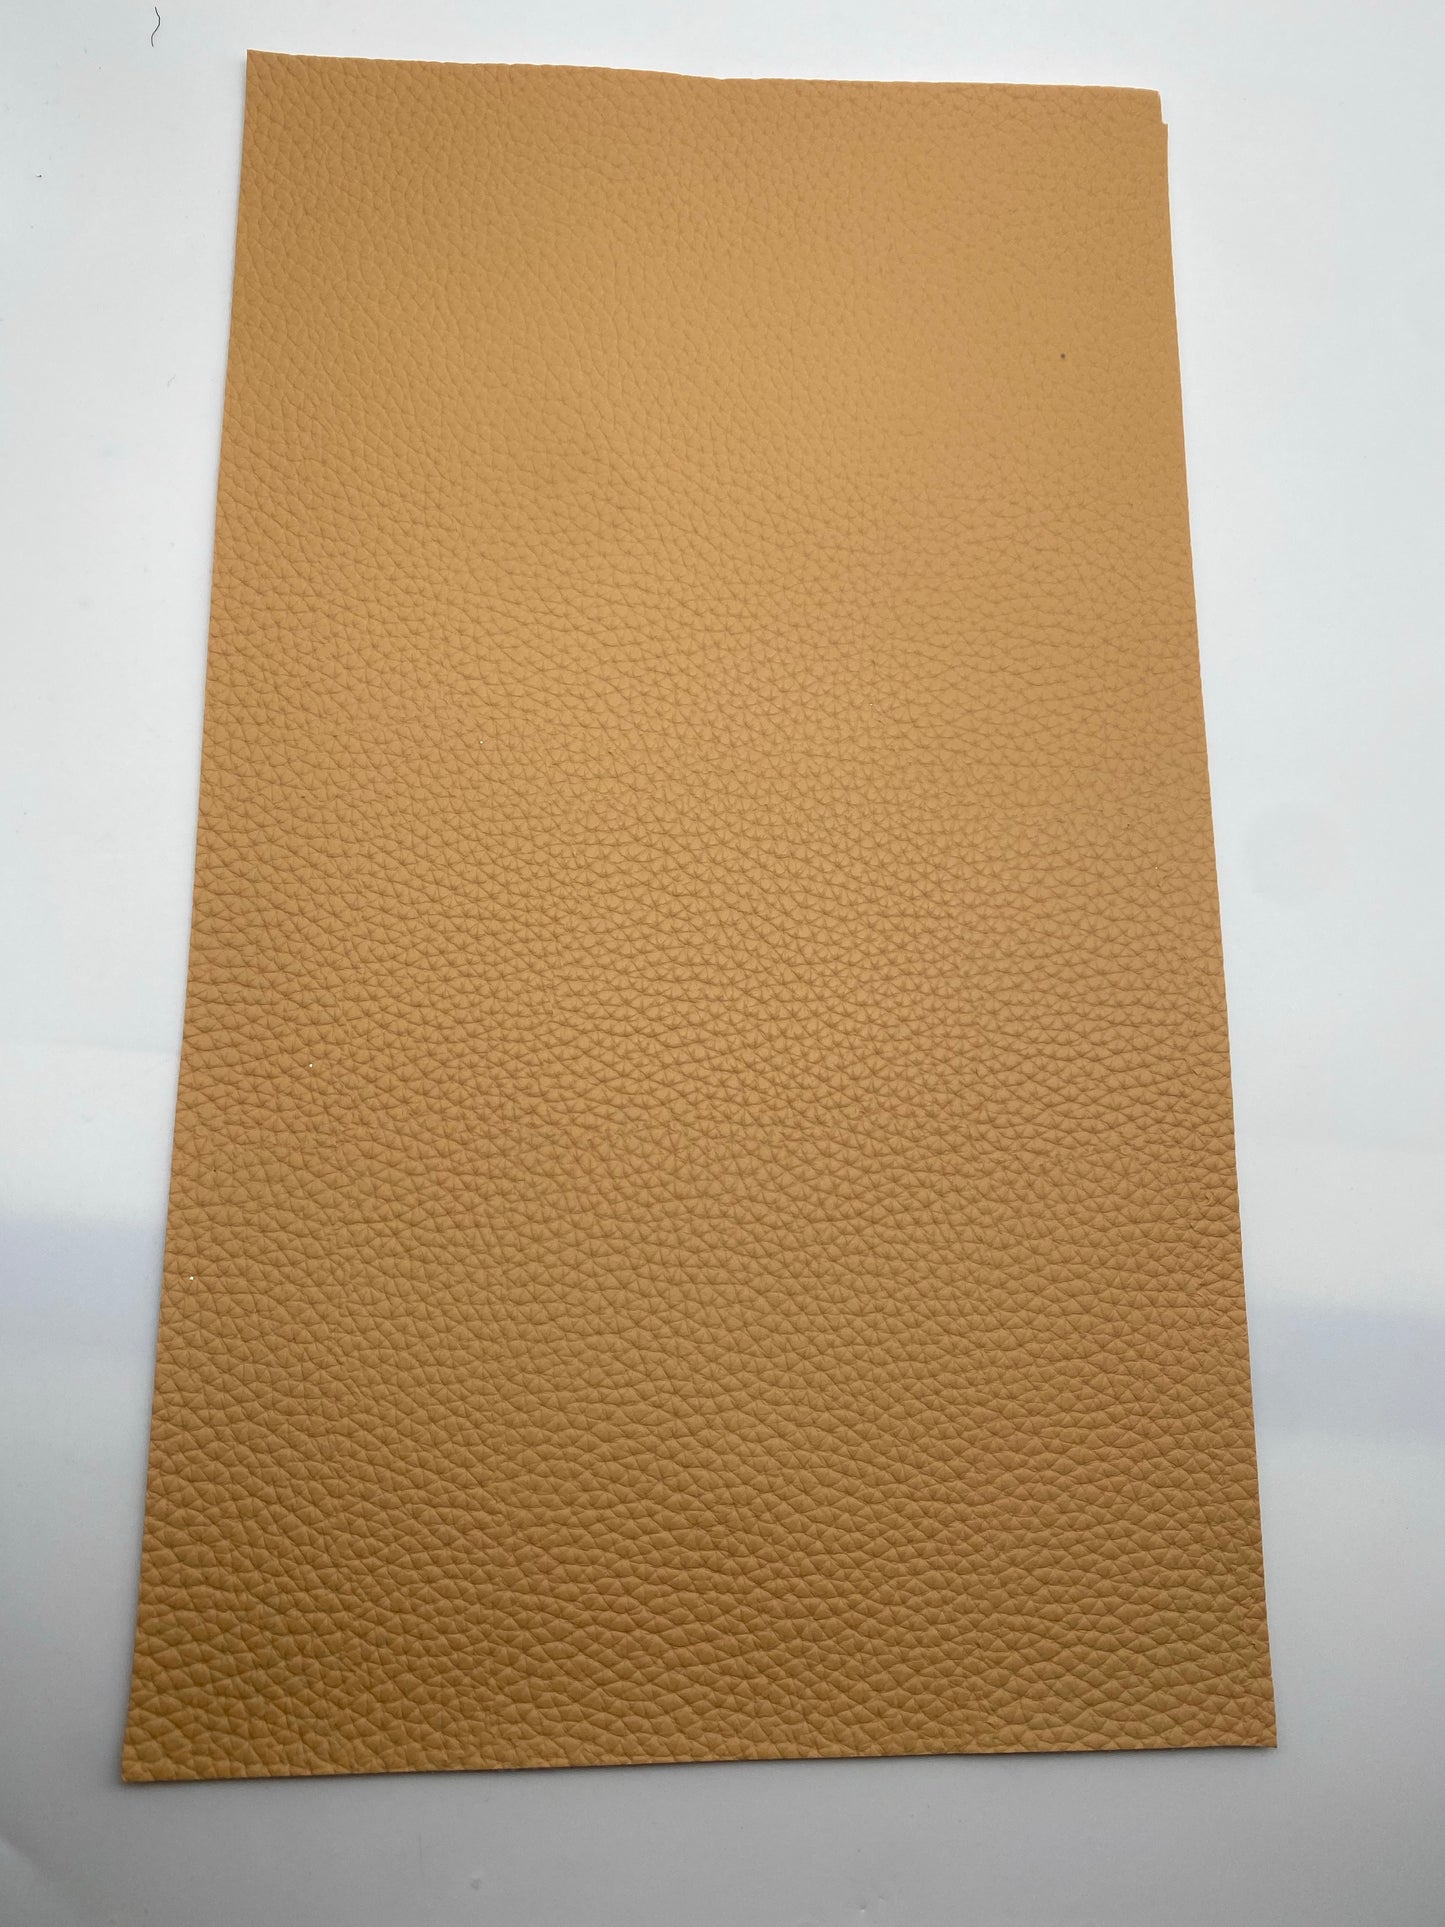 $1 CARAMEL/TAN SOLID PEBBLED FAUX LEATER SHEET